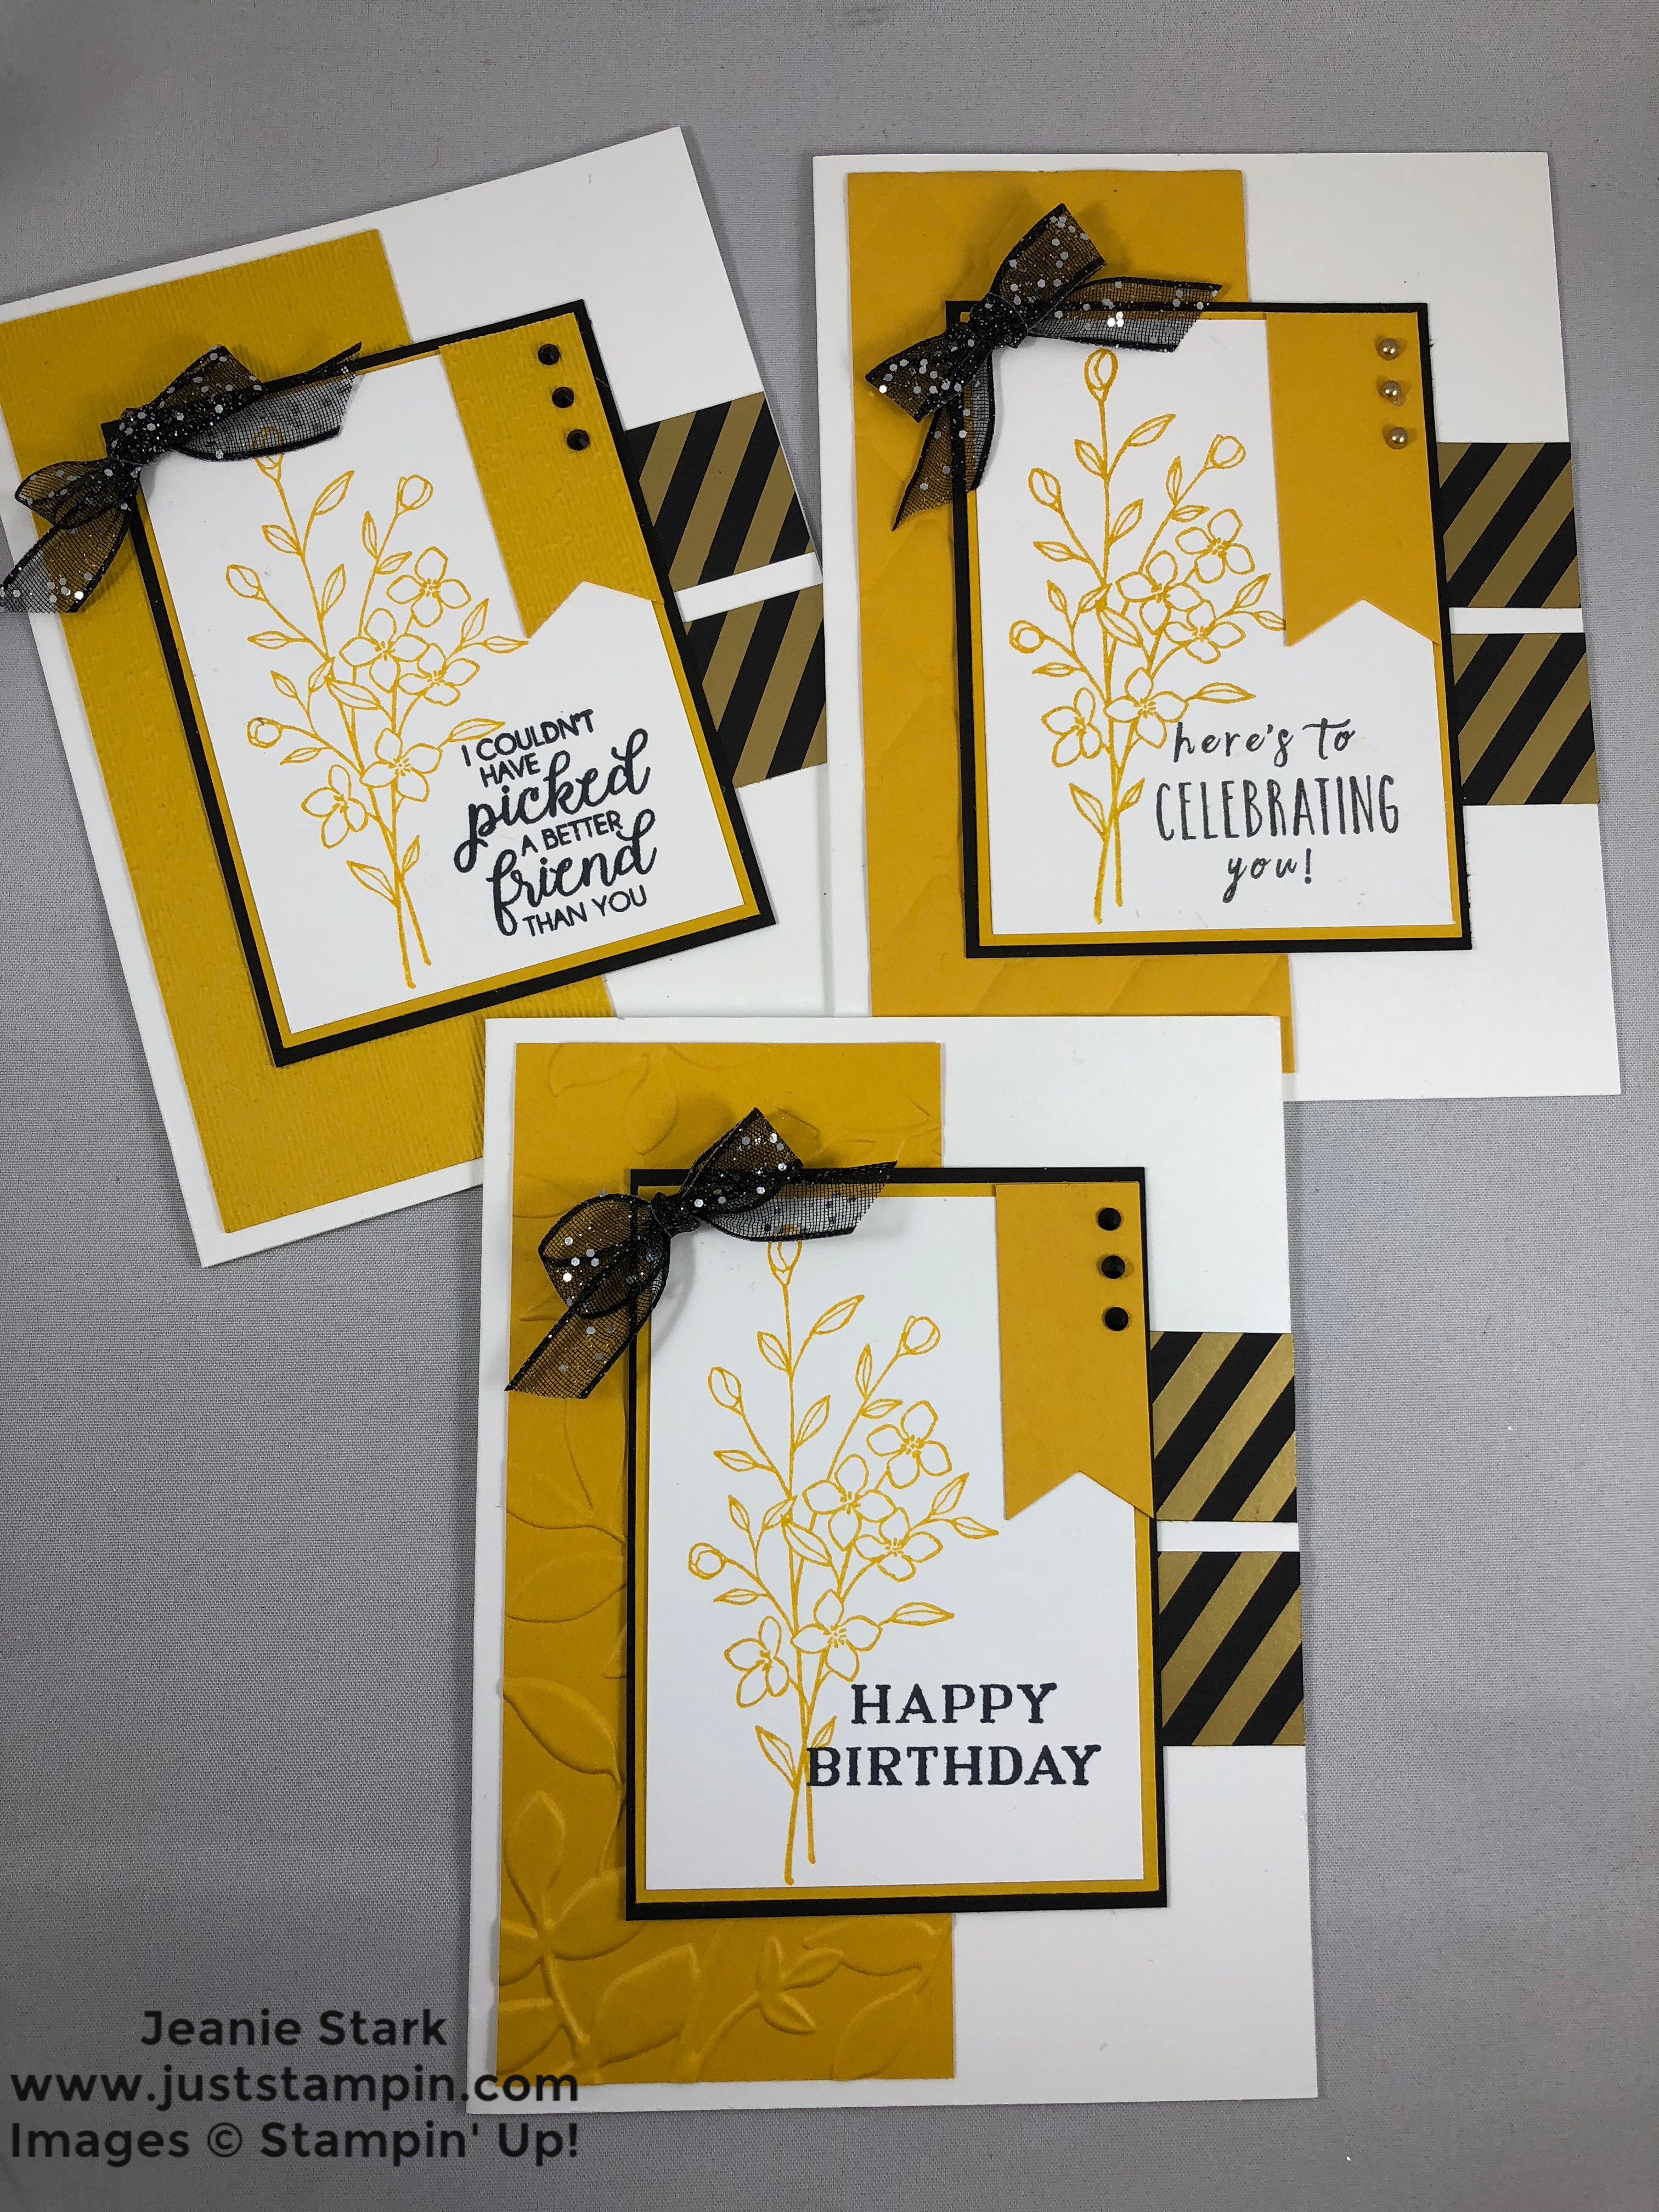 Stampin Up Touches of Texture embossed Birthday card idea - Jeanie Stark StampinUp